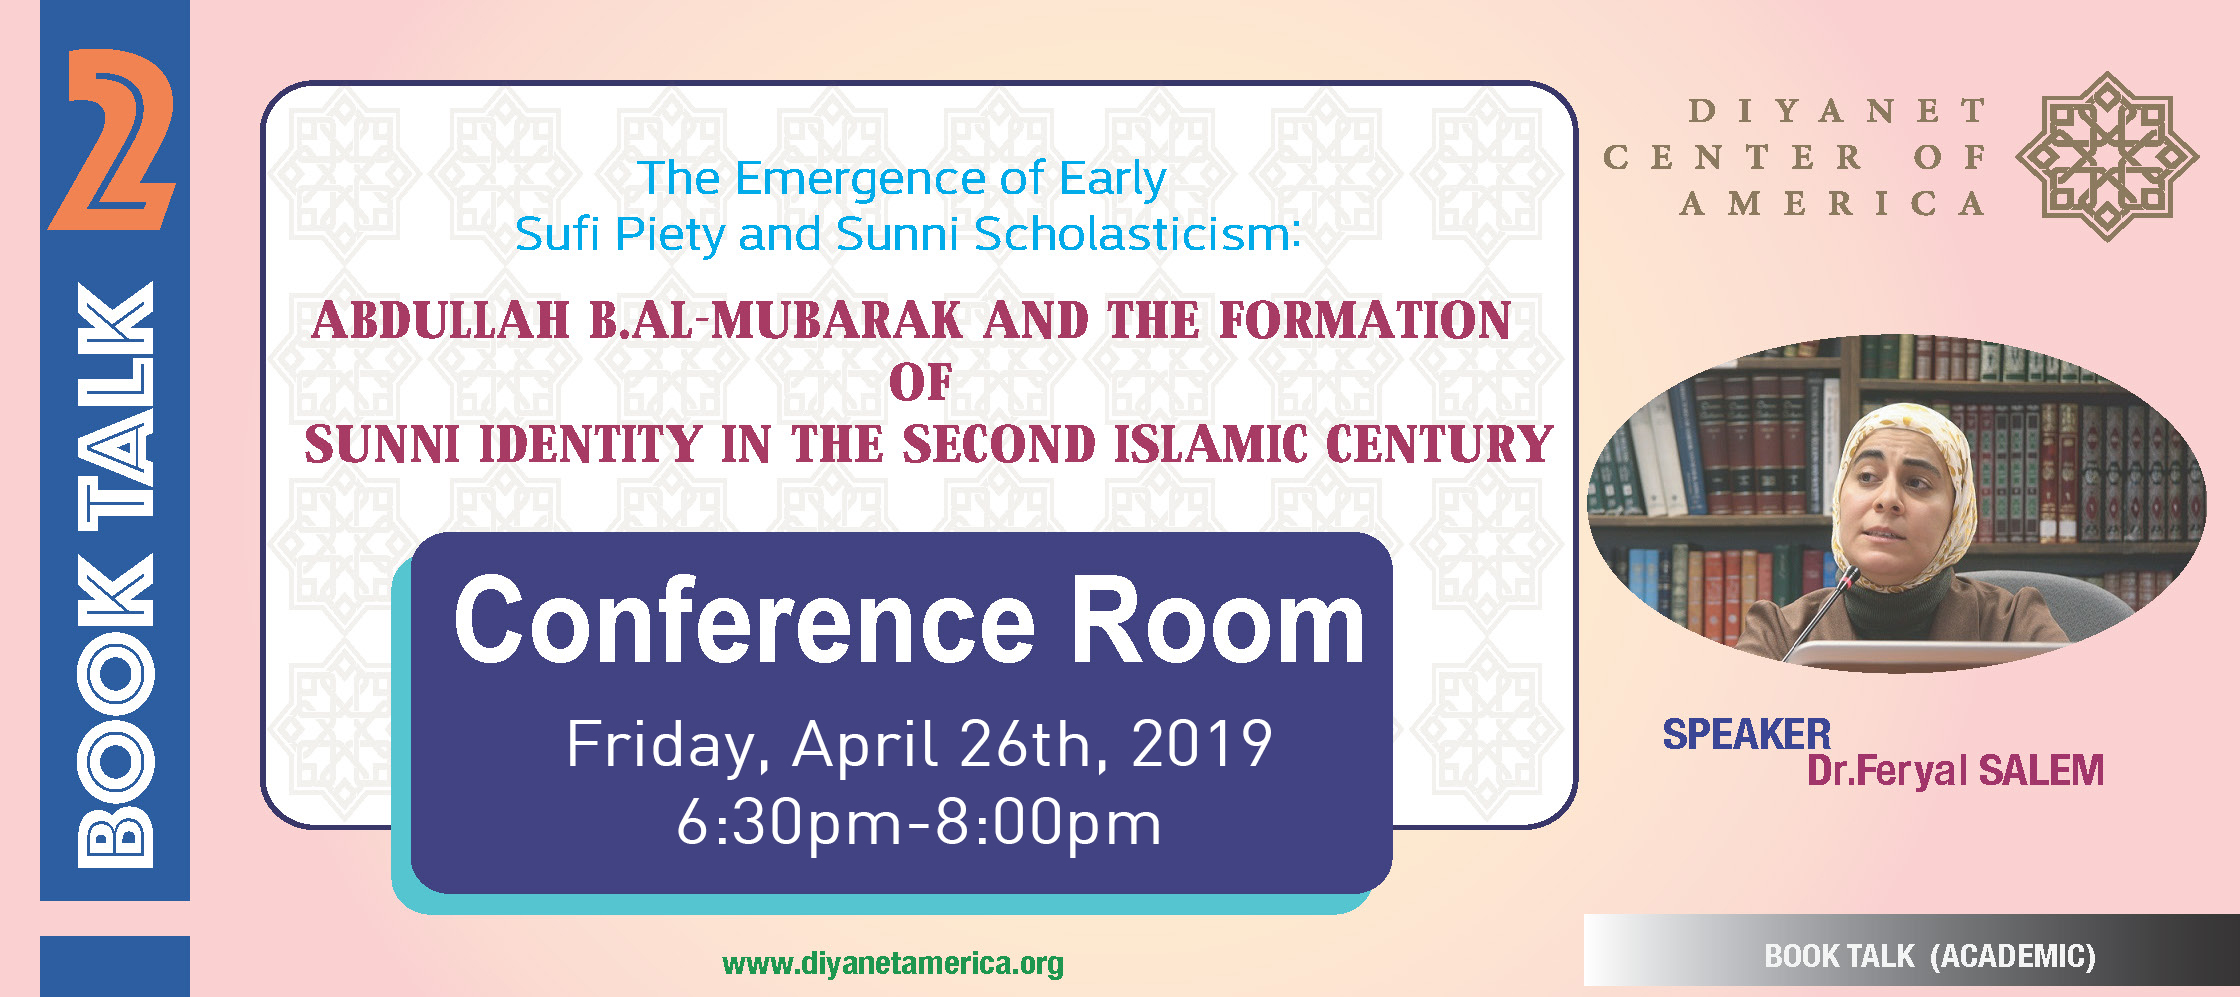 The Emergence of Early Sufi Piety and Sunni Scholasticism: Abdullah b. Al-Mubarak and the Formation of Sunni Identity in the Second Islamic Century